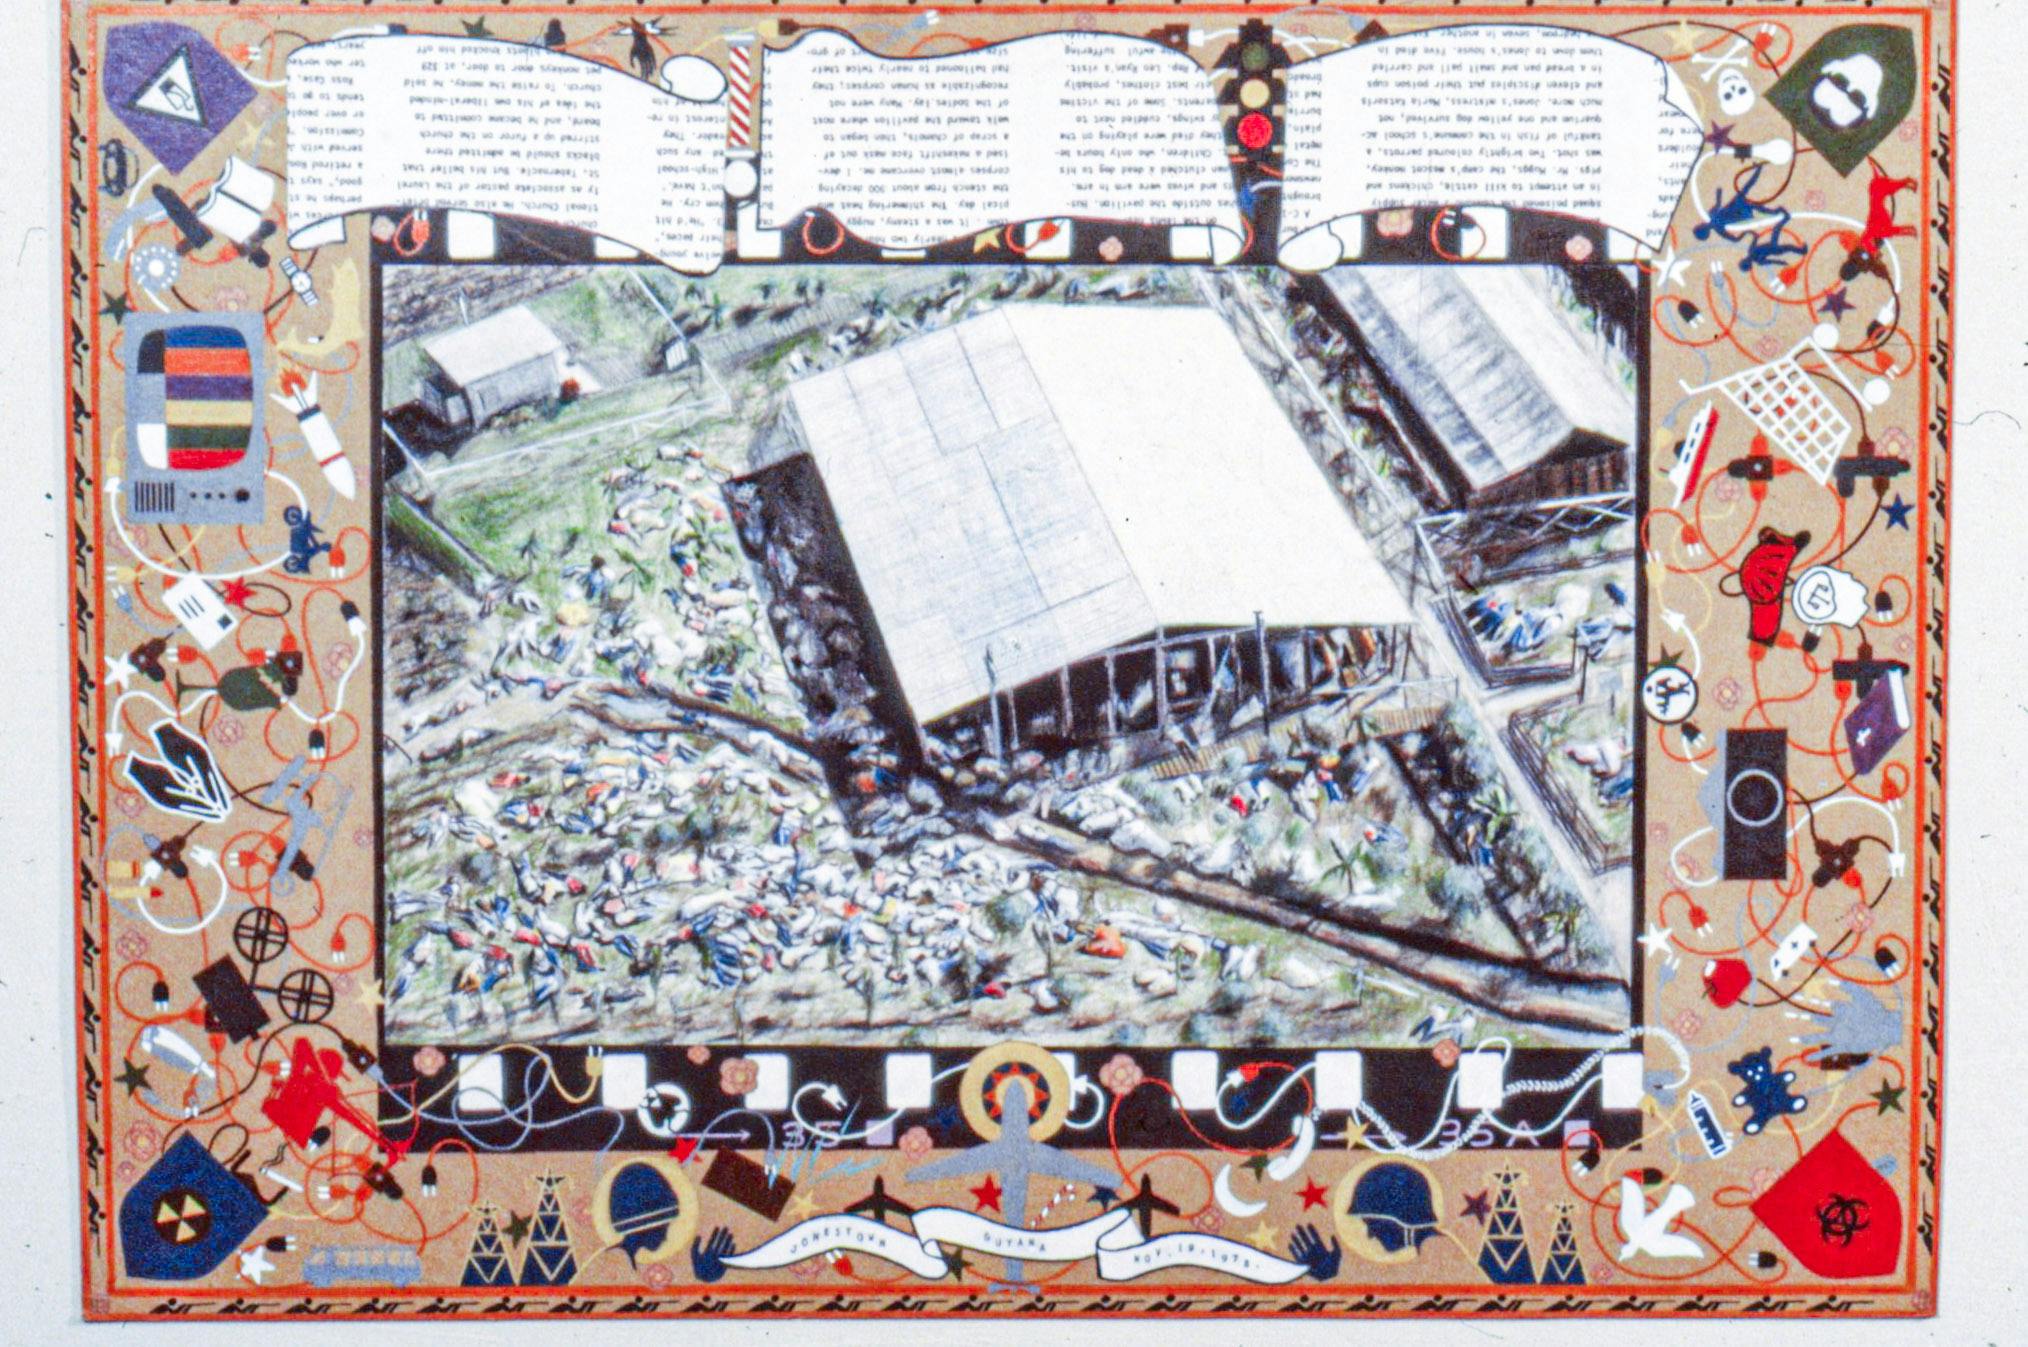 A 5 foot by 7 foot carpet on a wall. The carpet shows an aerial shot of the 1978 Jonestown tragedy, and has a decorative border with stylized images of airplanes, cables, toys, soldiers, and more.